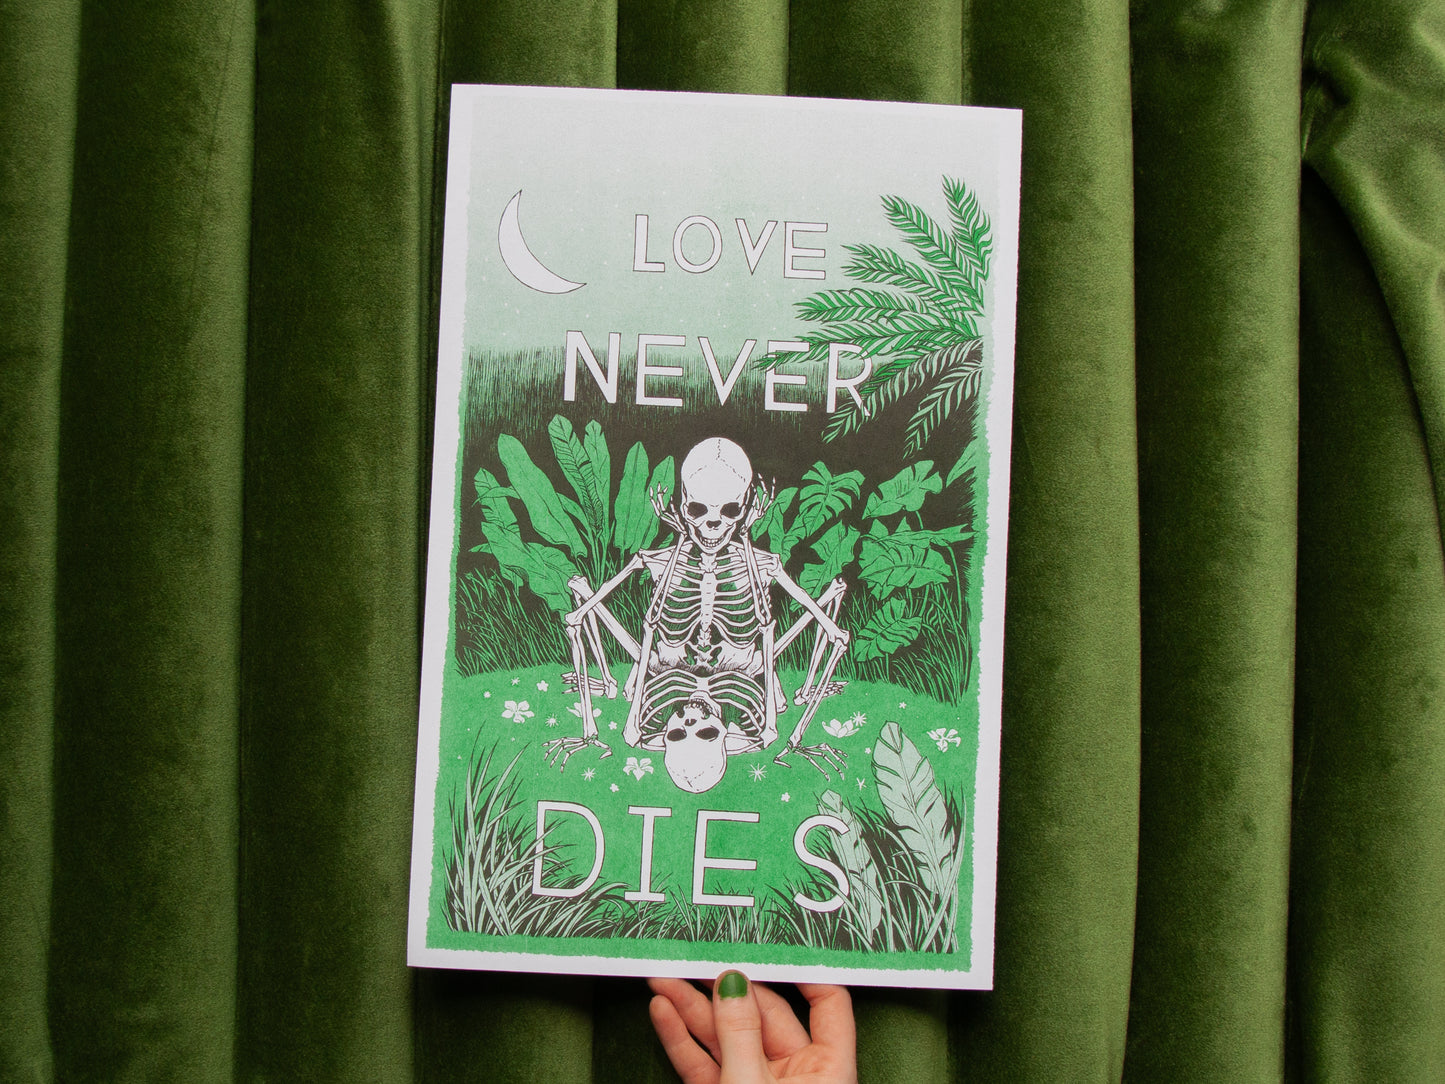 Two skeletons in love are doing it in a field of green. The print is held by hand over green fabric, and is 10 inches by 16 inches. It is an illustration printed on a risograph in green and black inks.